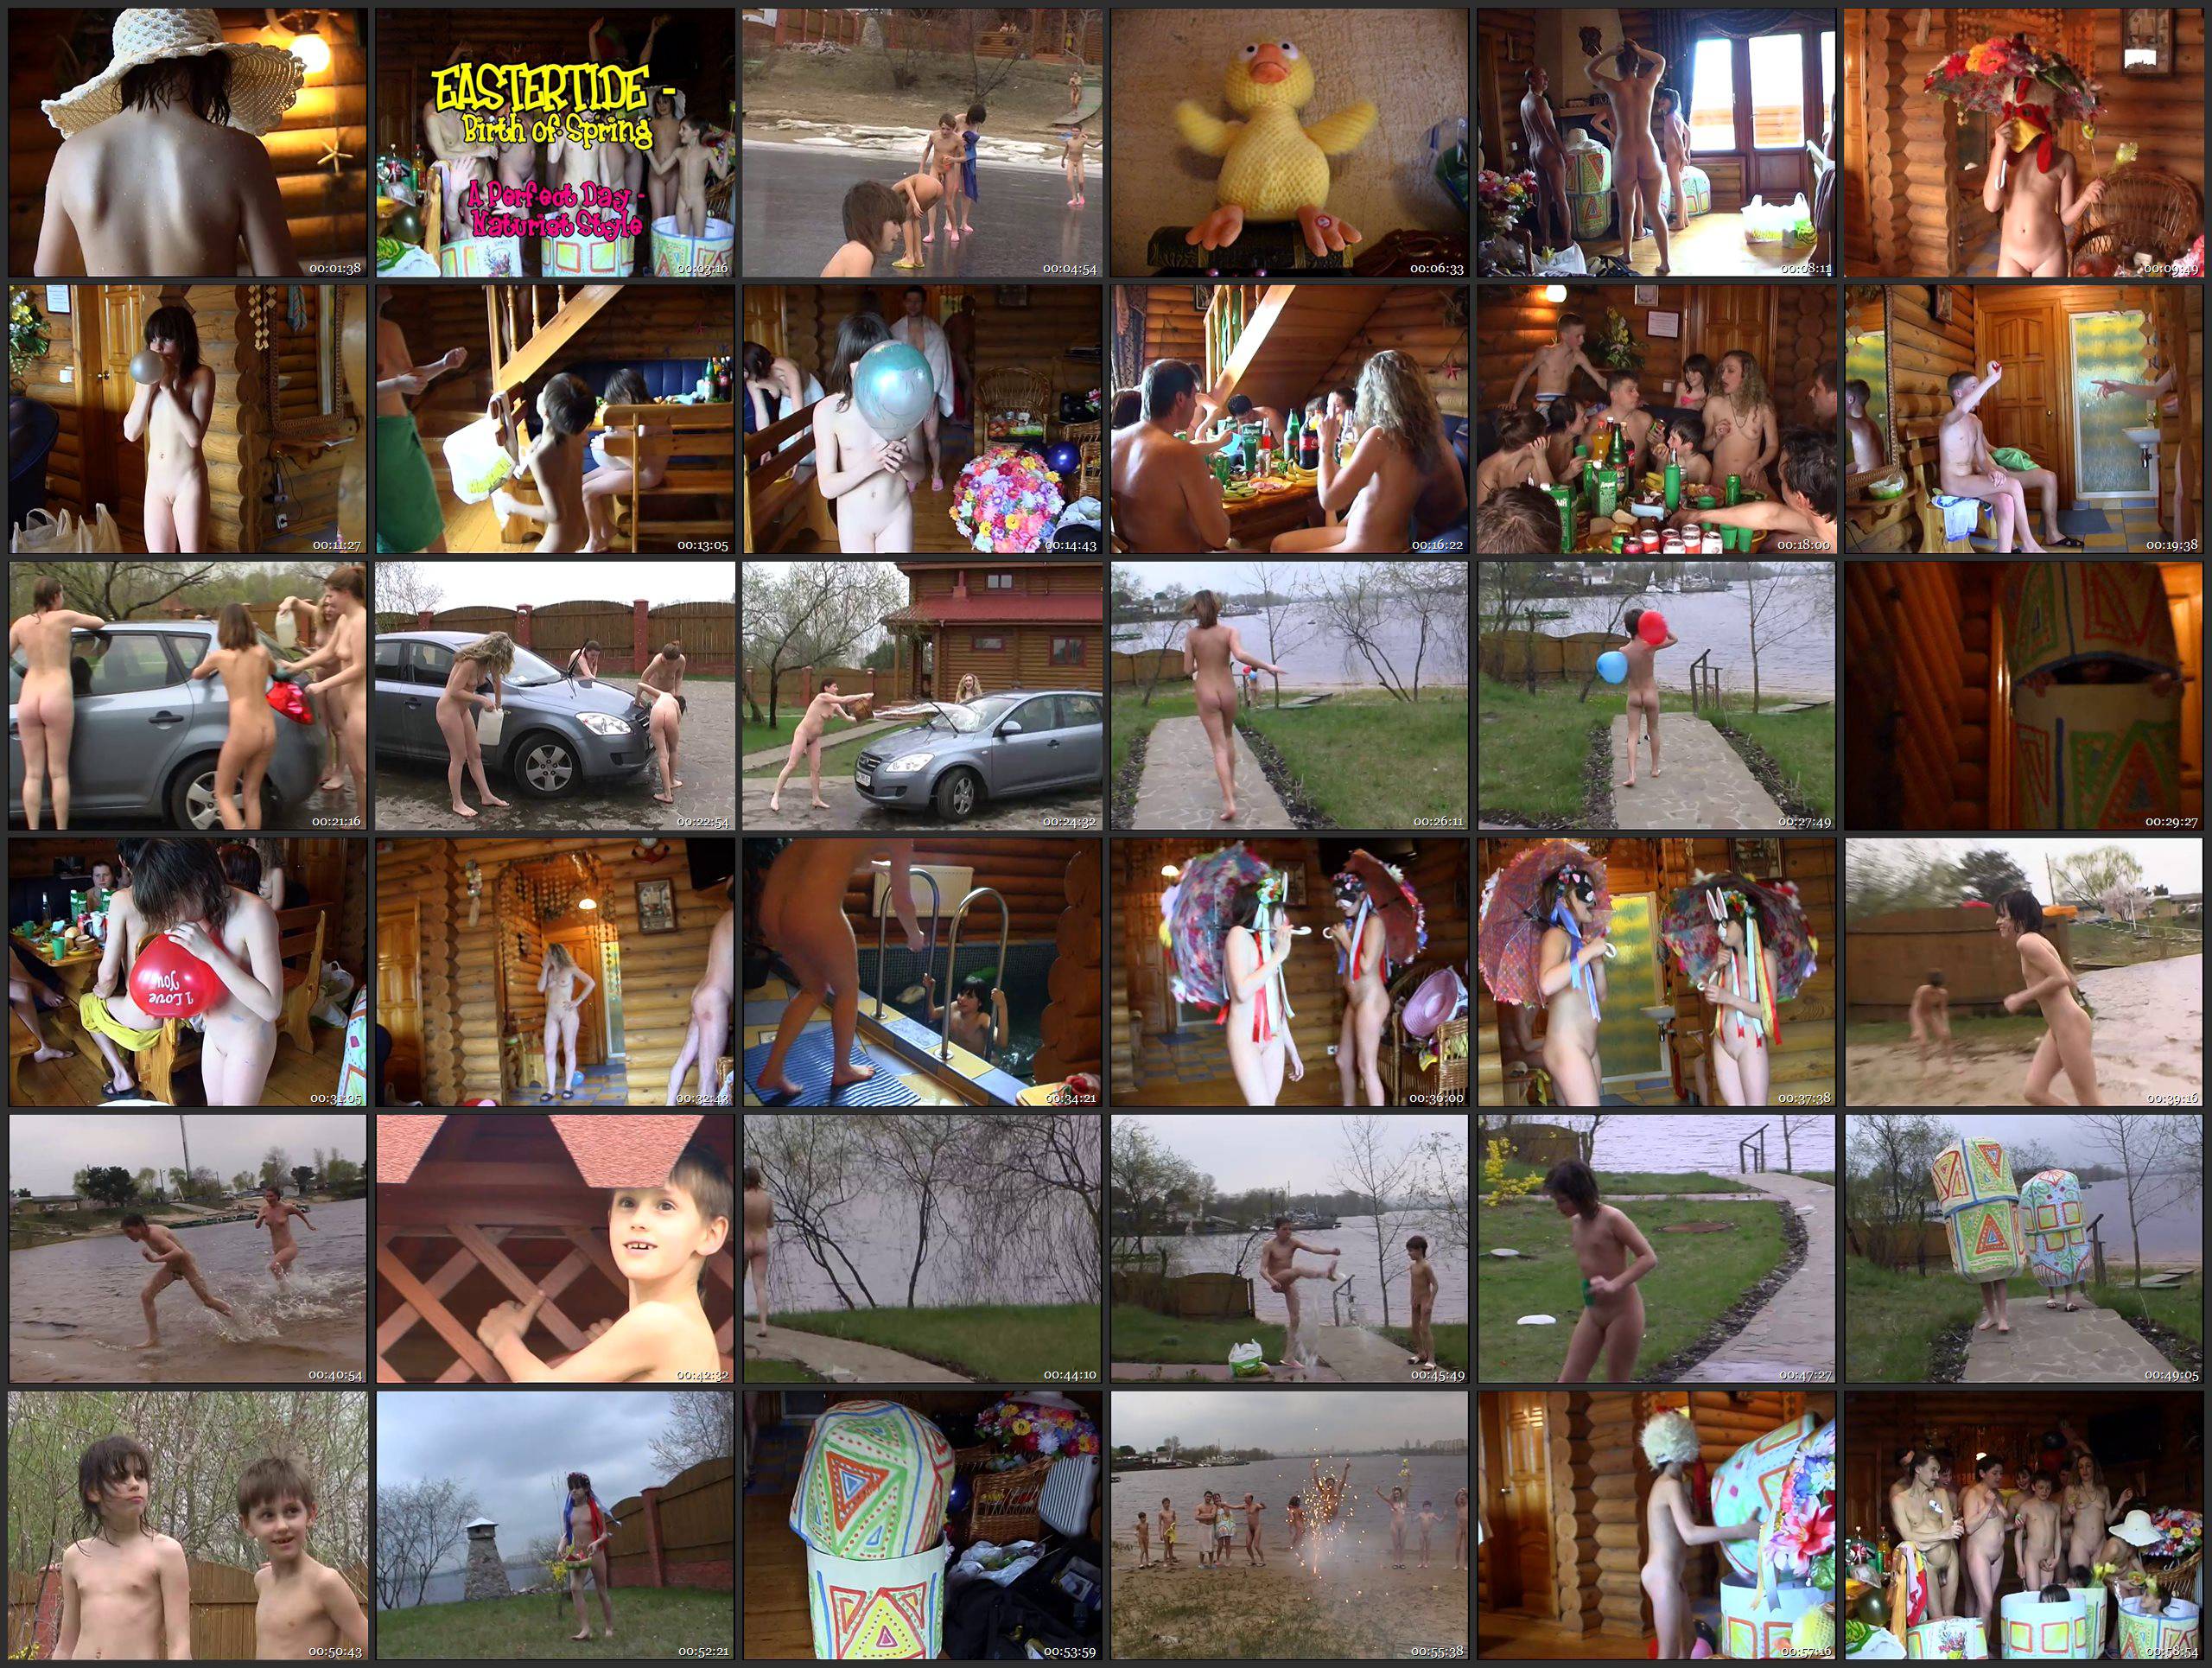 RussianBare.com Eastertide - Birth of Spring. A Perfect Day - Naturist Style - Thumbnails